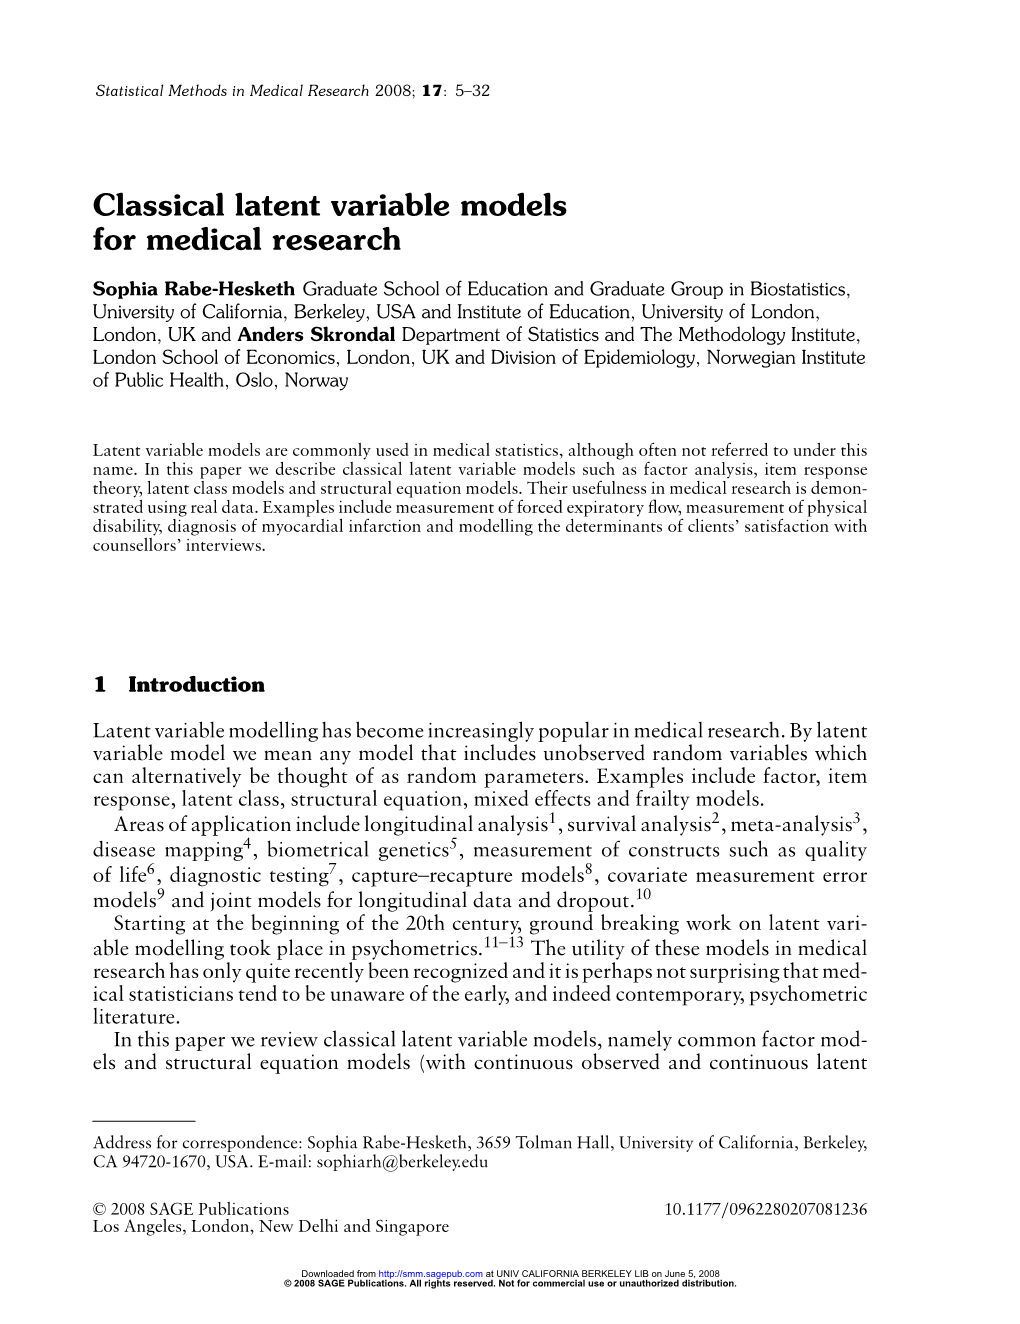 Classical Latent Variable Models for Medical Research